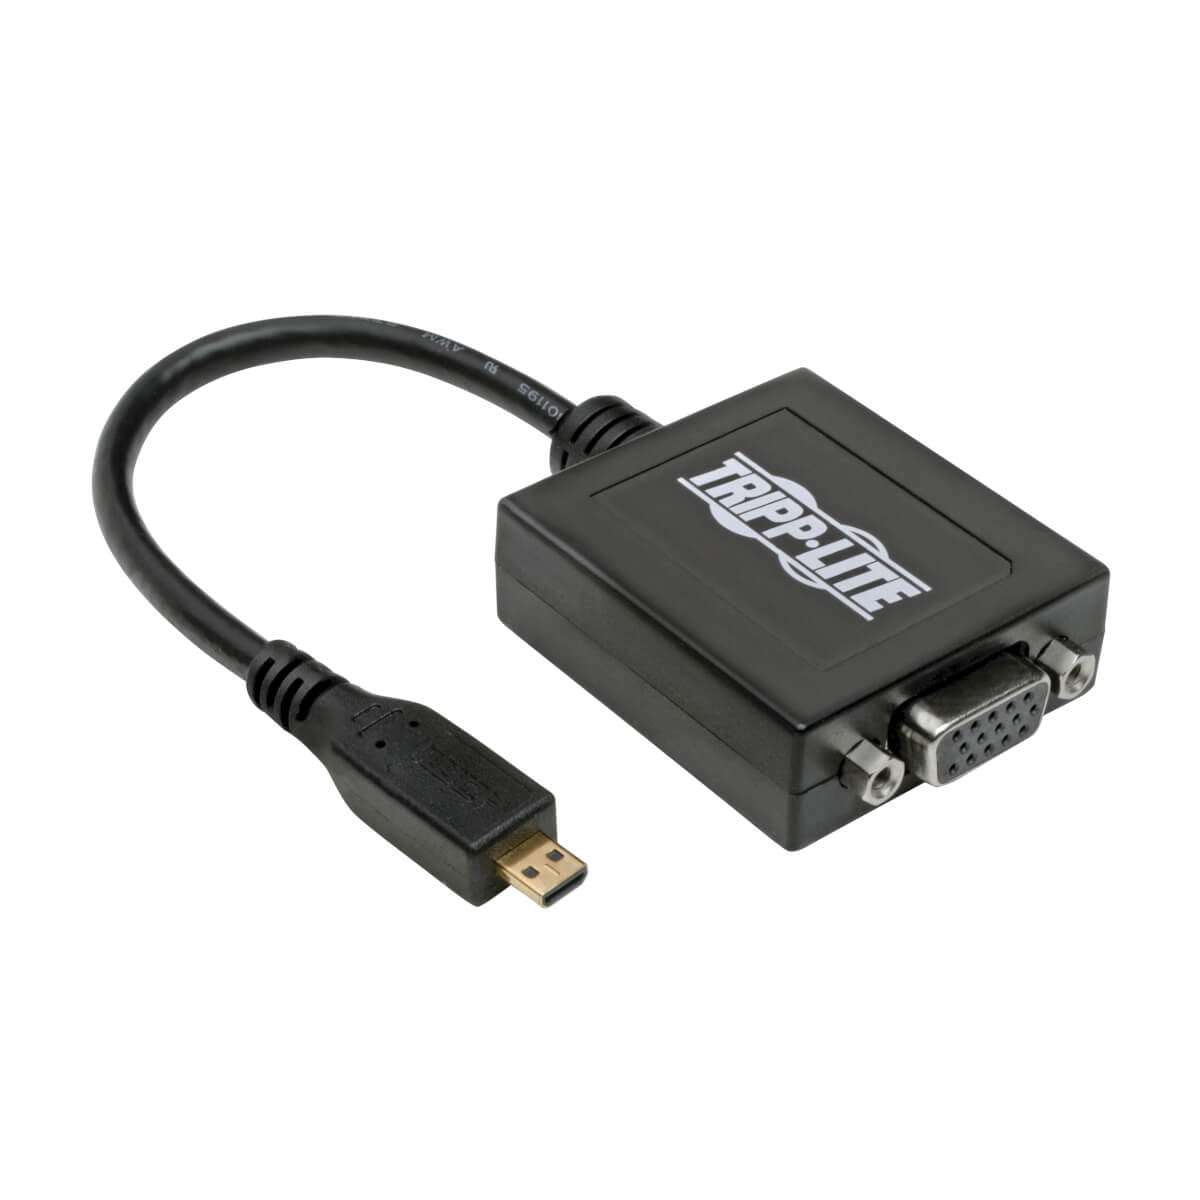 Tripp Lite P131-06N-Microa Micro Hdmi To Vga Adapter Video Converter With Audio For Smartphones/Tablets/Ultrabooks, (M/F), 6-In. (15.24 Cm)